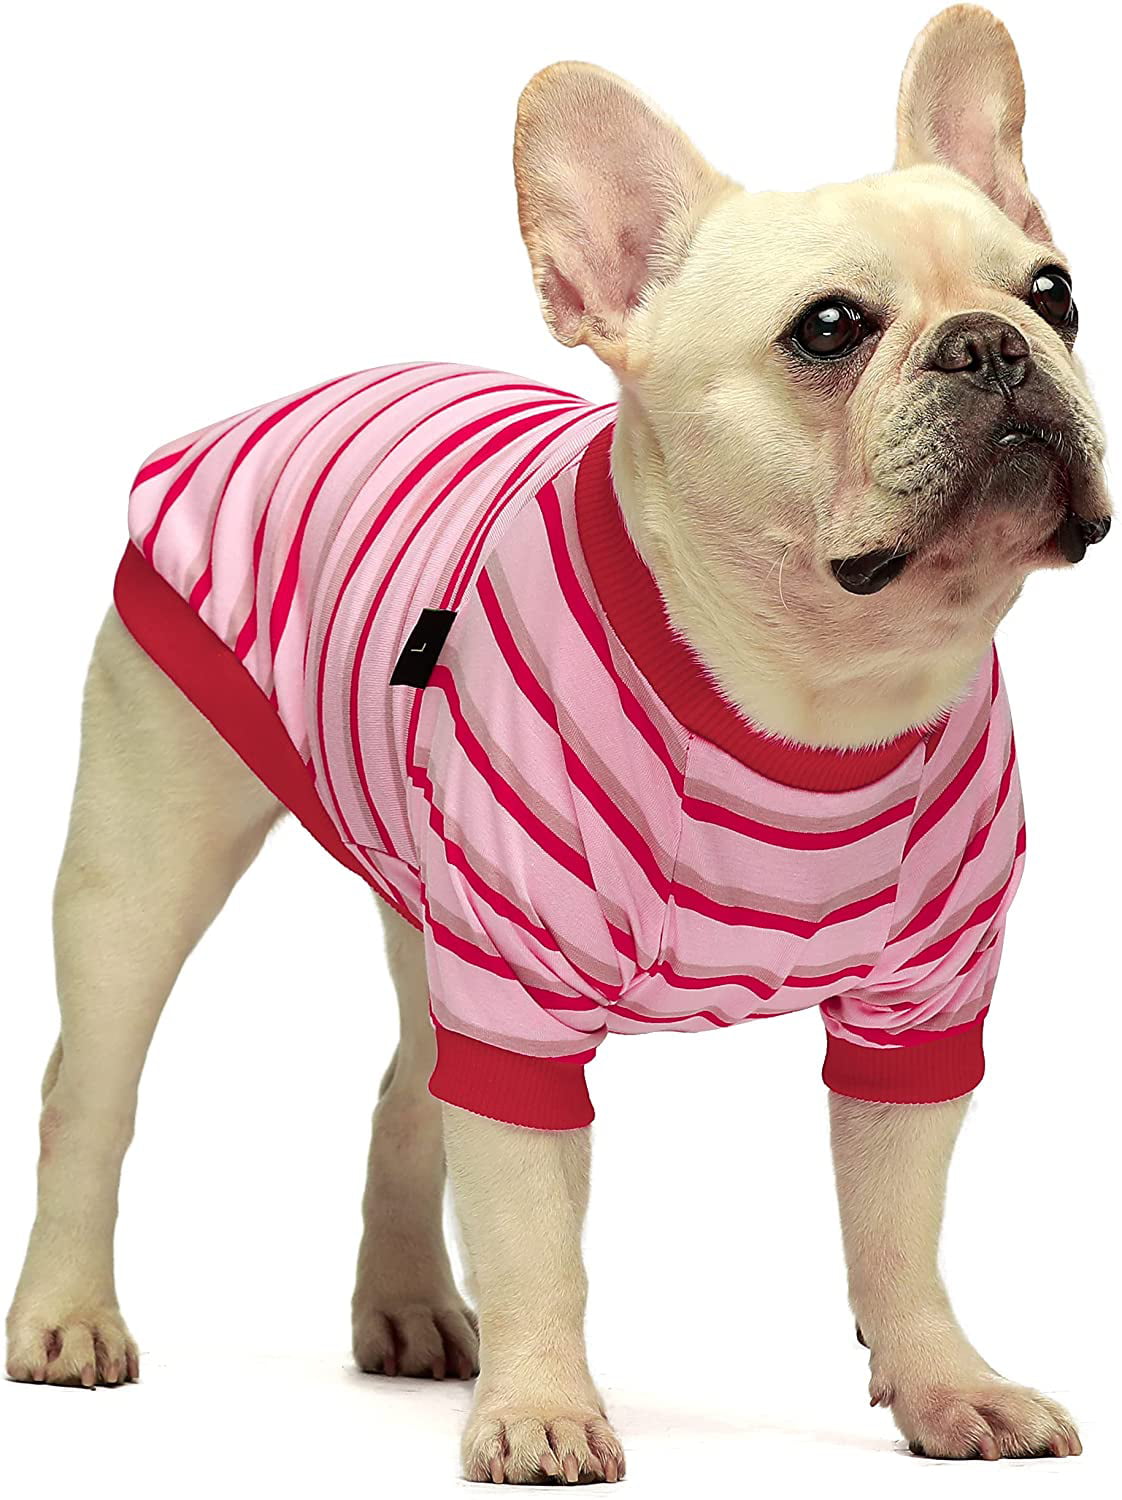 Fitwarm 3 Pack Color Block Striped Dog Shirt, Summer Dog Clothes for Small  Dogs, Breathable Lightweight Pet Tshirt with Sleeves, Cat Outfit, Oliver